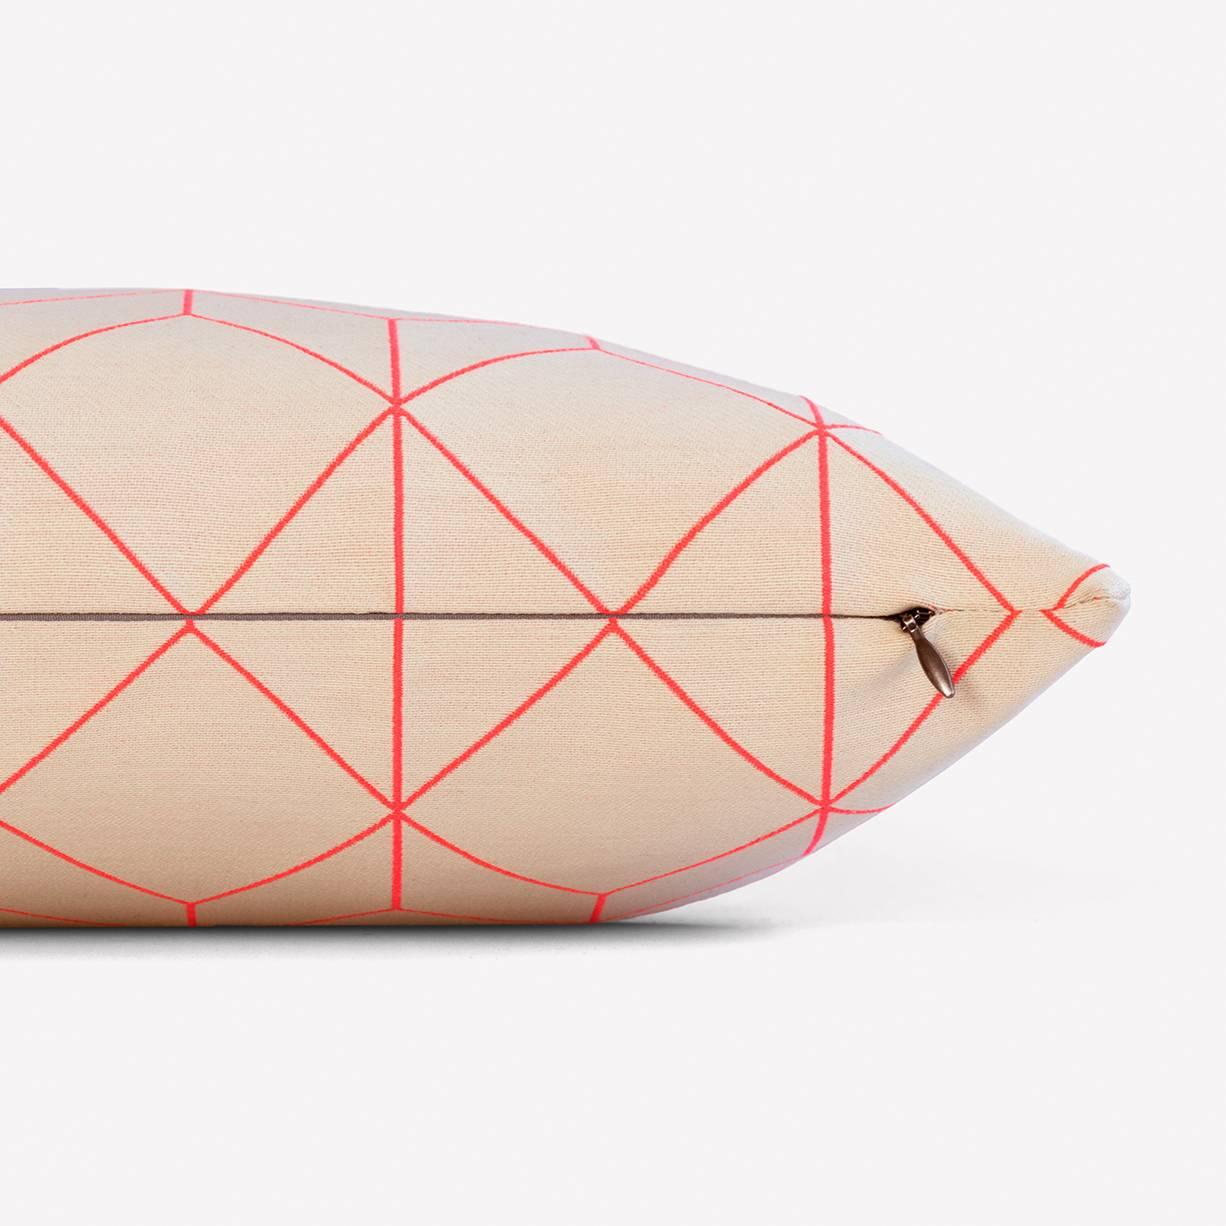 Maharam Pillow
Bright Cube by Scholten & Baijings
002 Coral

Bright grid, bright angle, and bright cube are second in a series of products designed by Scholten & Baijings in collaboration with Maharam. Drawing upon Scholten & Baijings' distinct